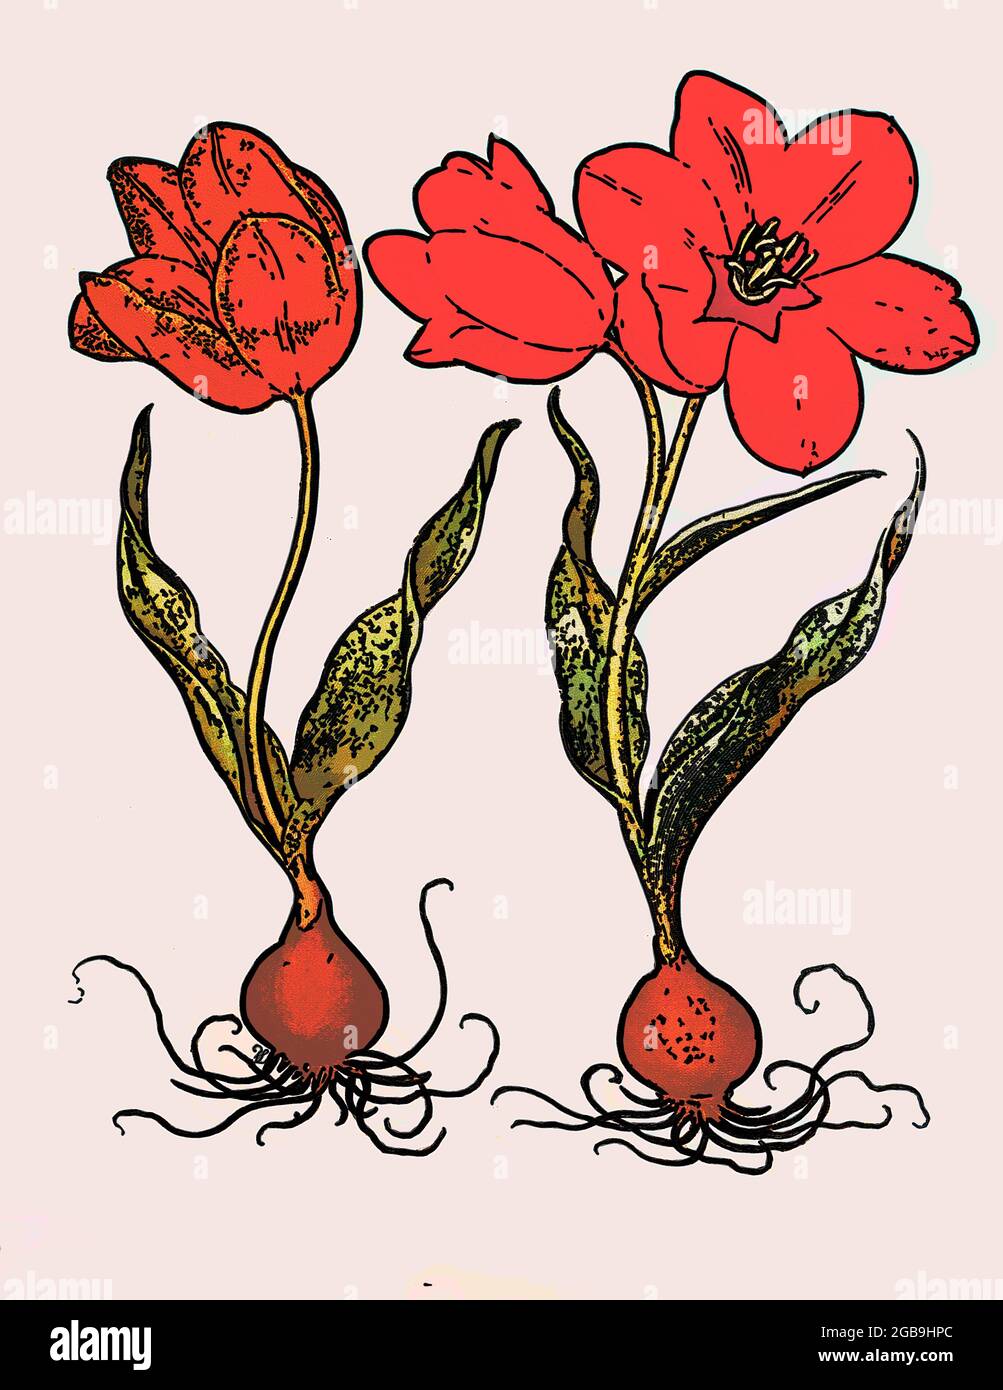 hand painted copperplate print of Tulip. From Hortus Eystettensis, by Basilius Besler, published in 1613. Stock Photo